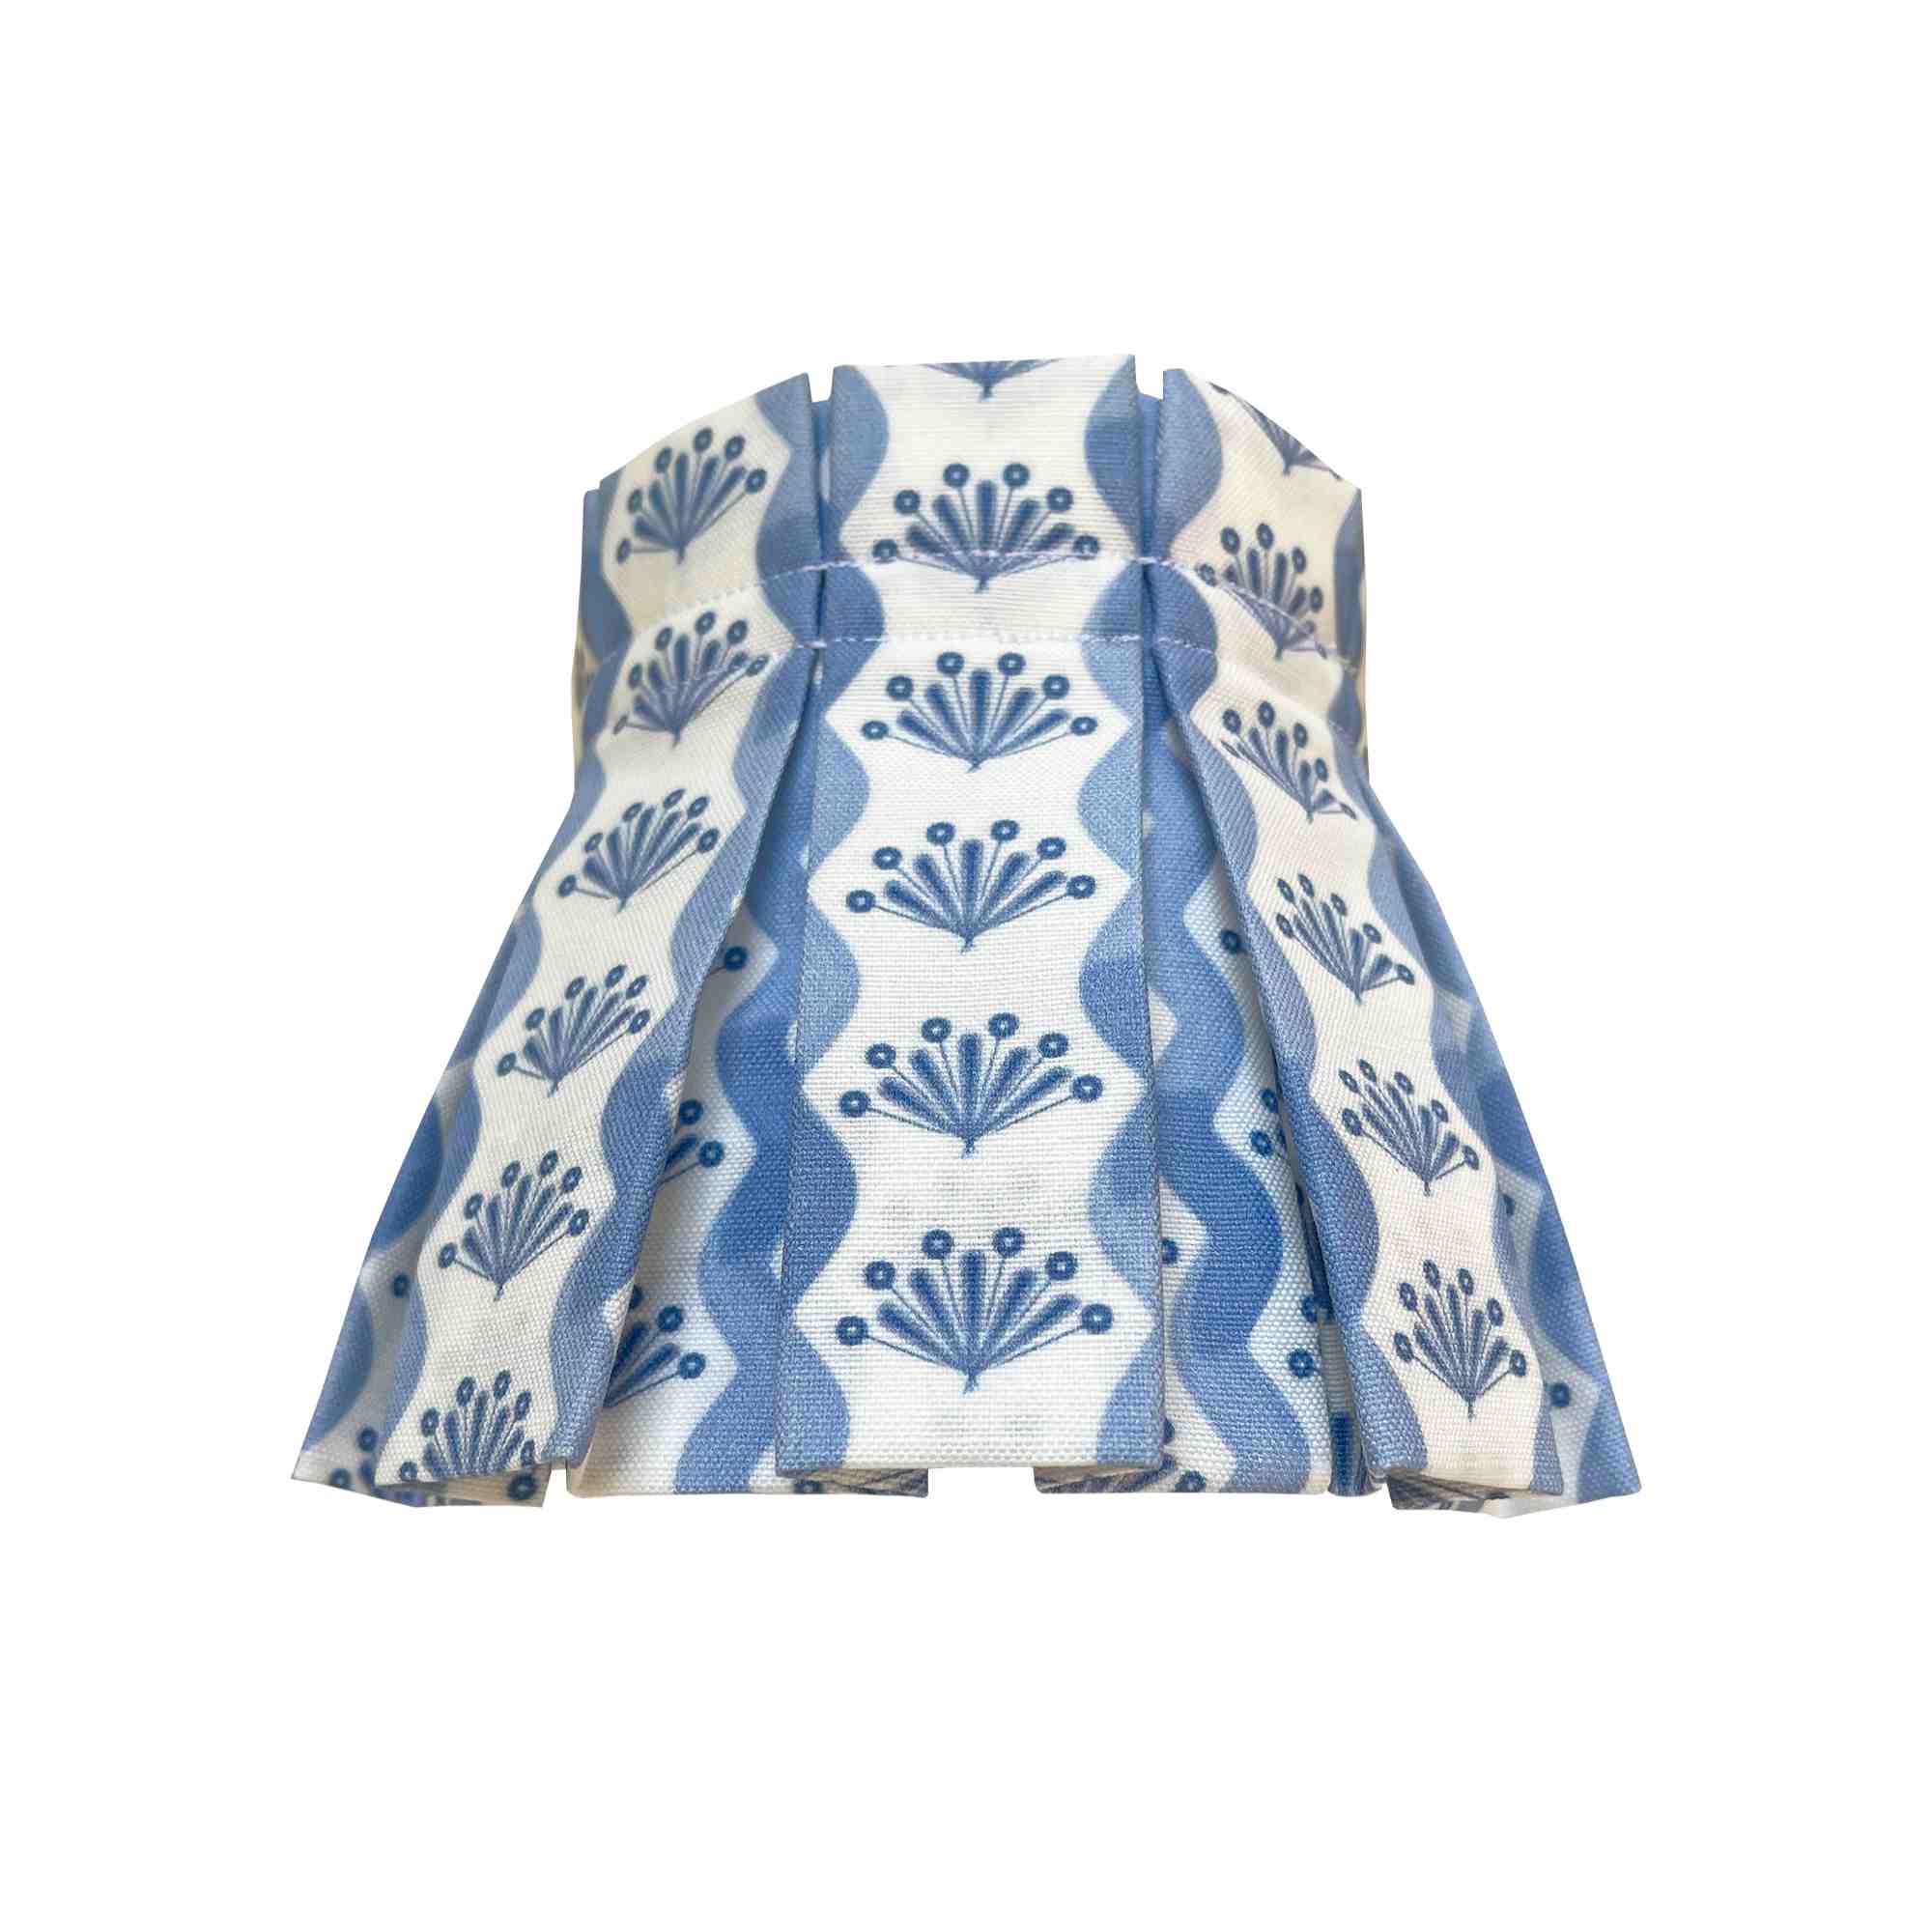 Cute pacific blue lampshade cover in corn flower in classic box pleat style